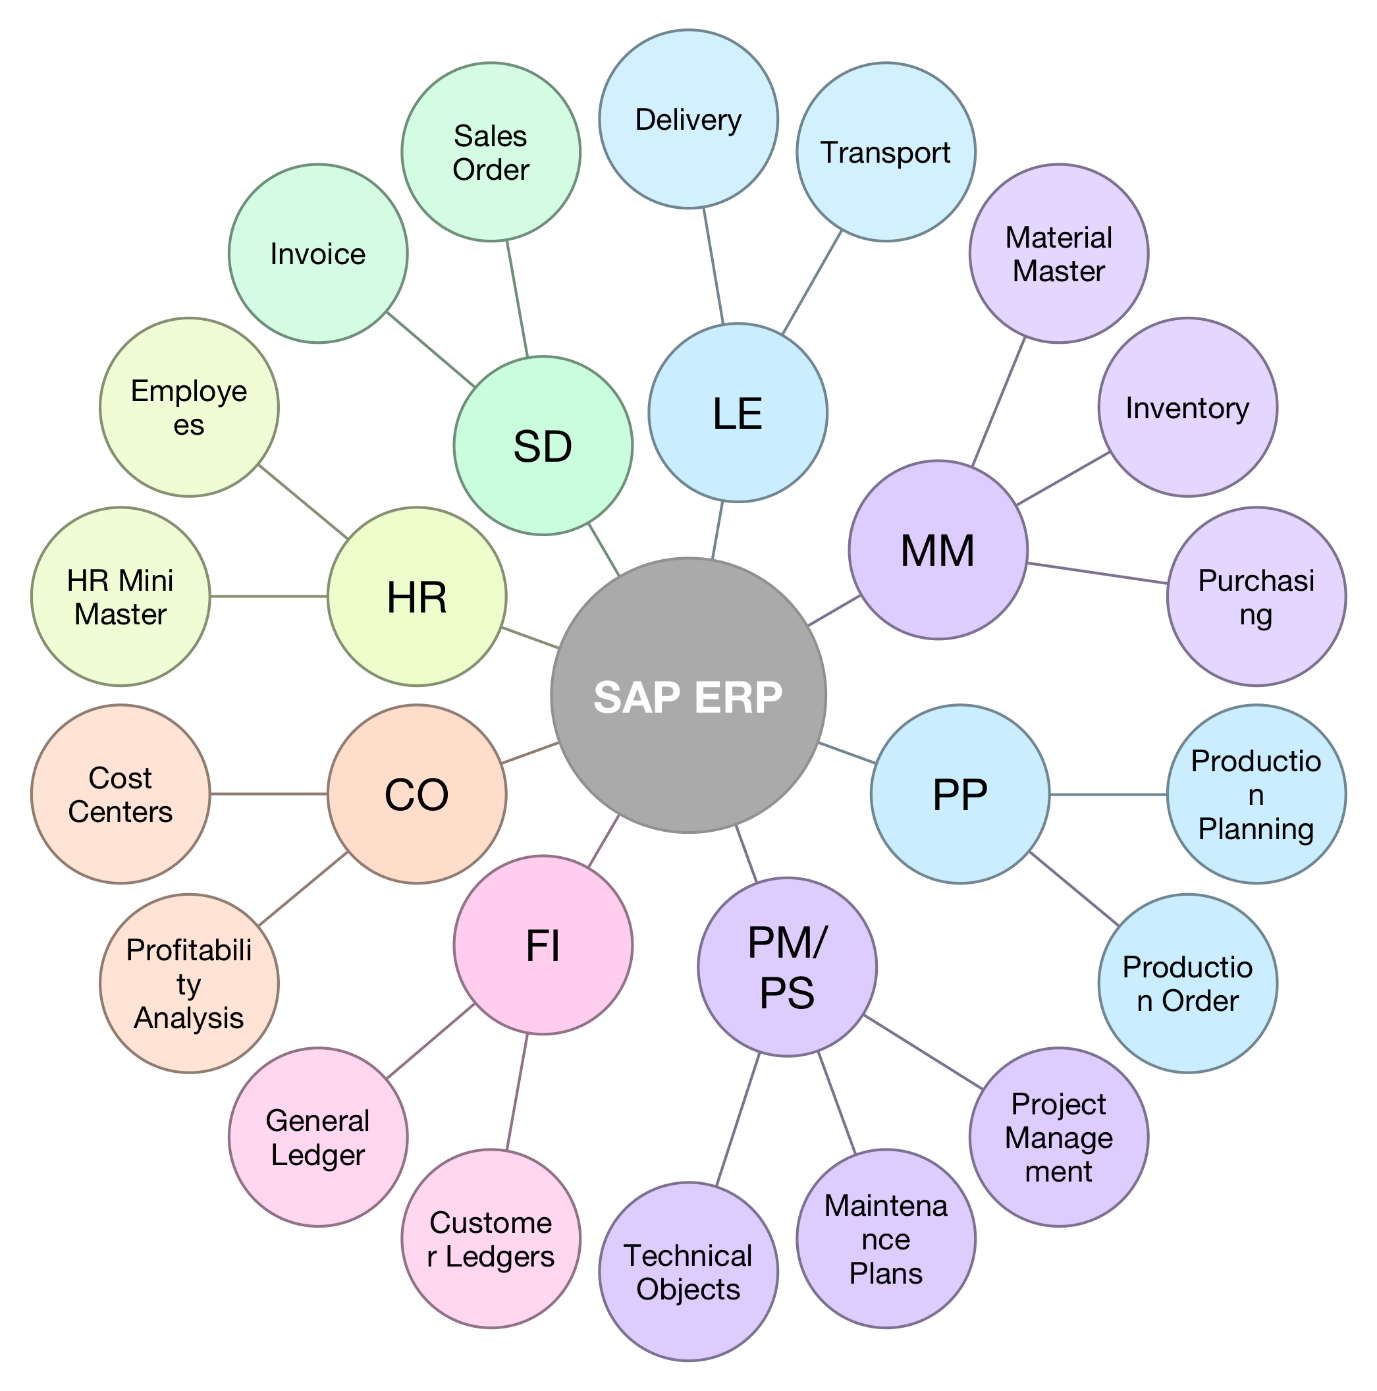 An overview of how different modules integrate to comprise an SAP system